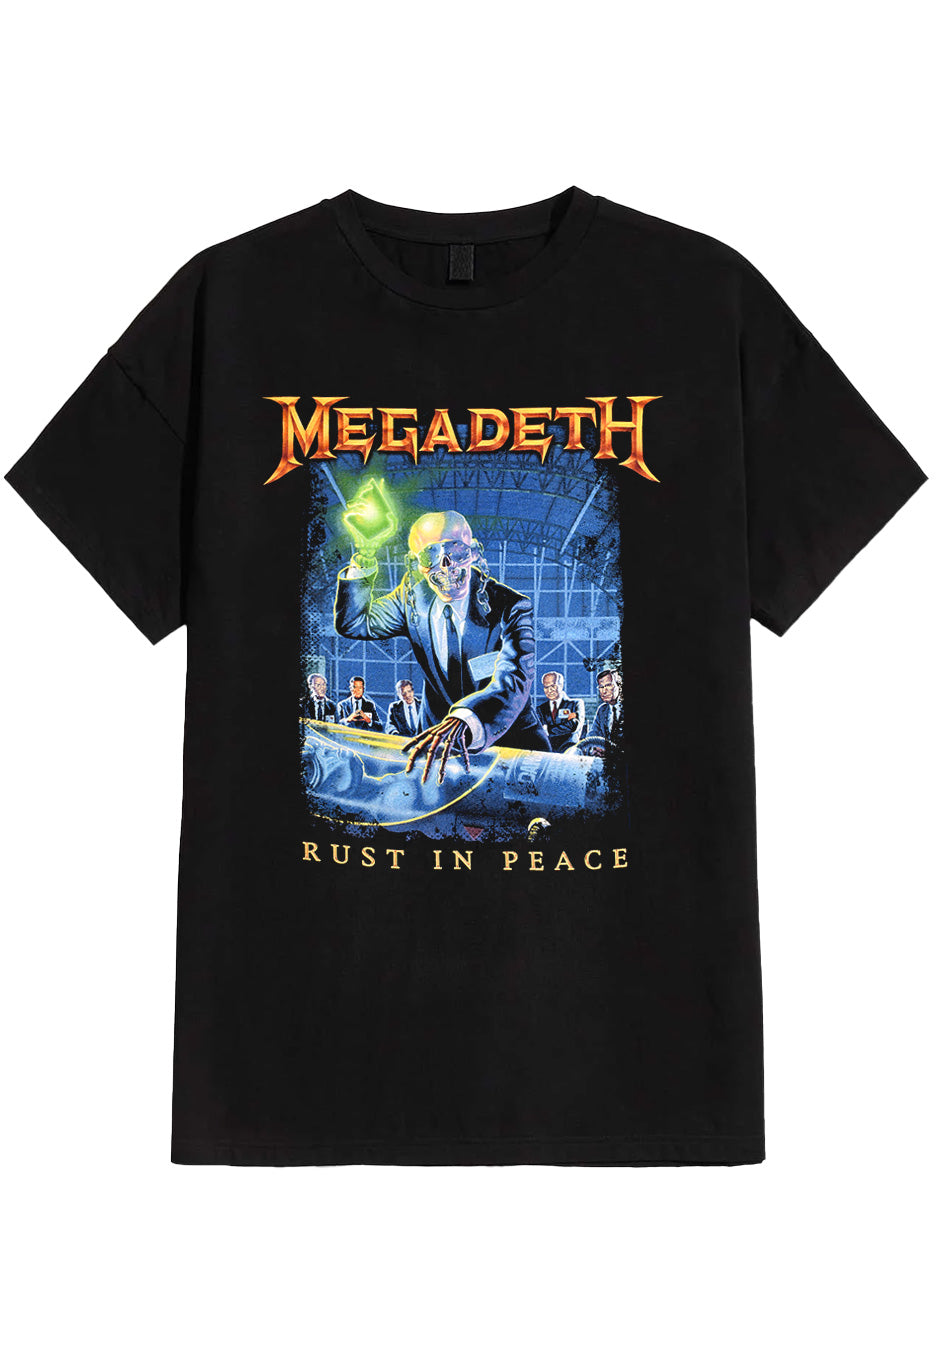 Megadeth - Rust In Peace - T-Shirt